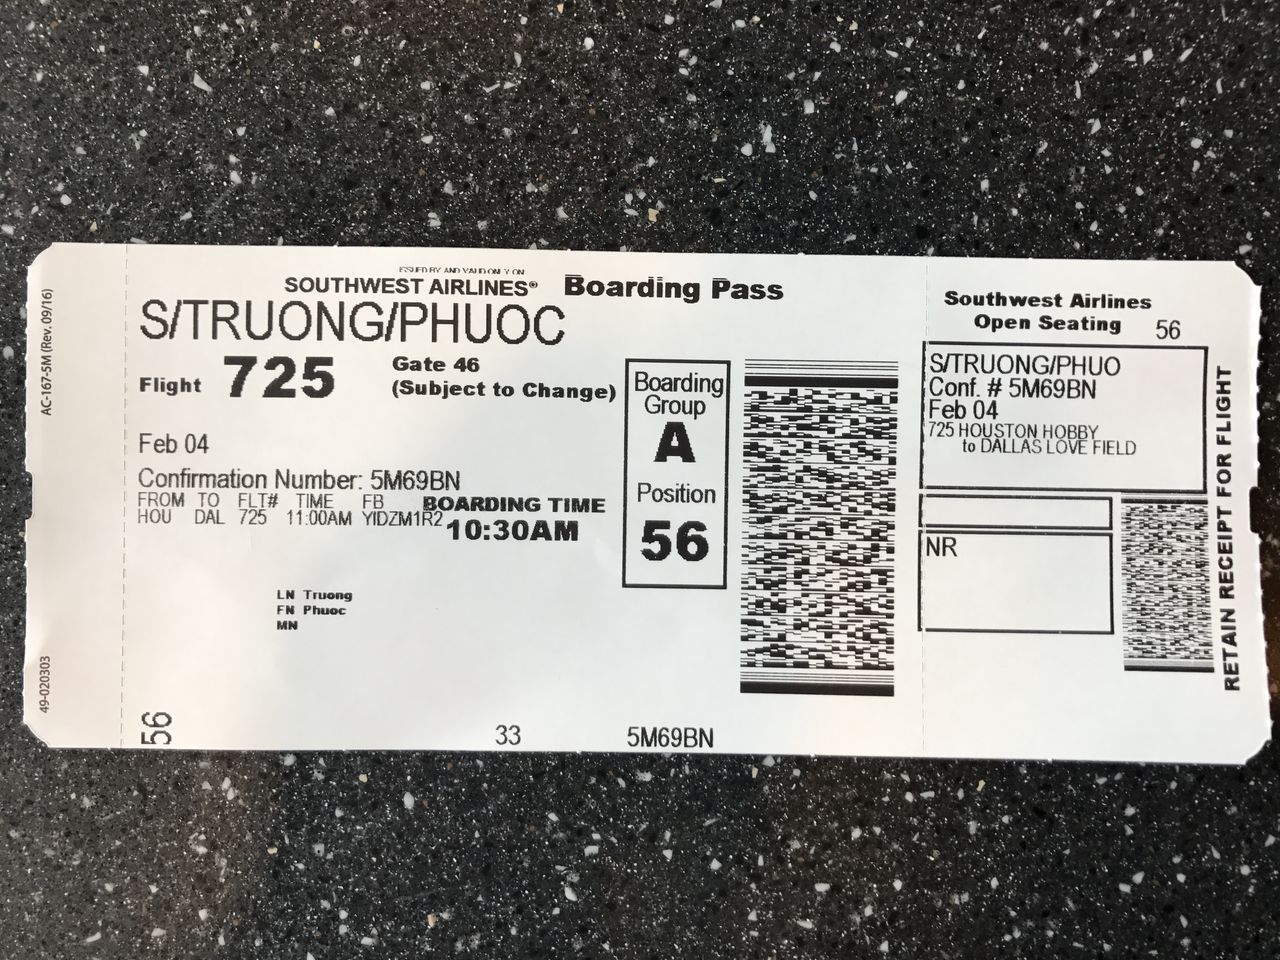 check southwest airlines boarding pass